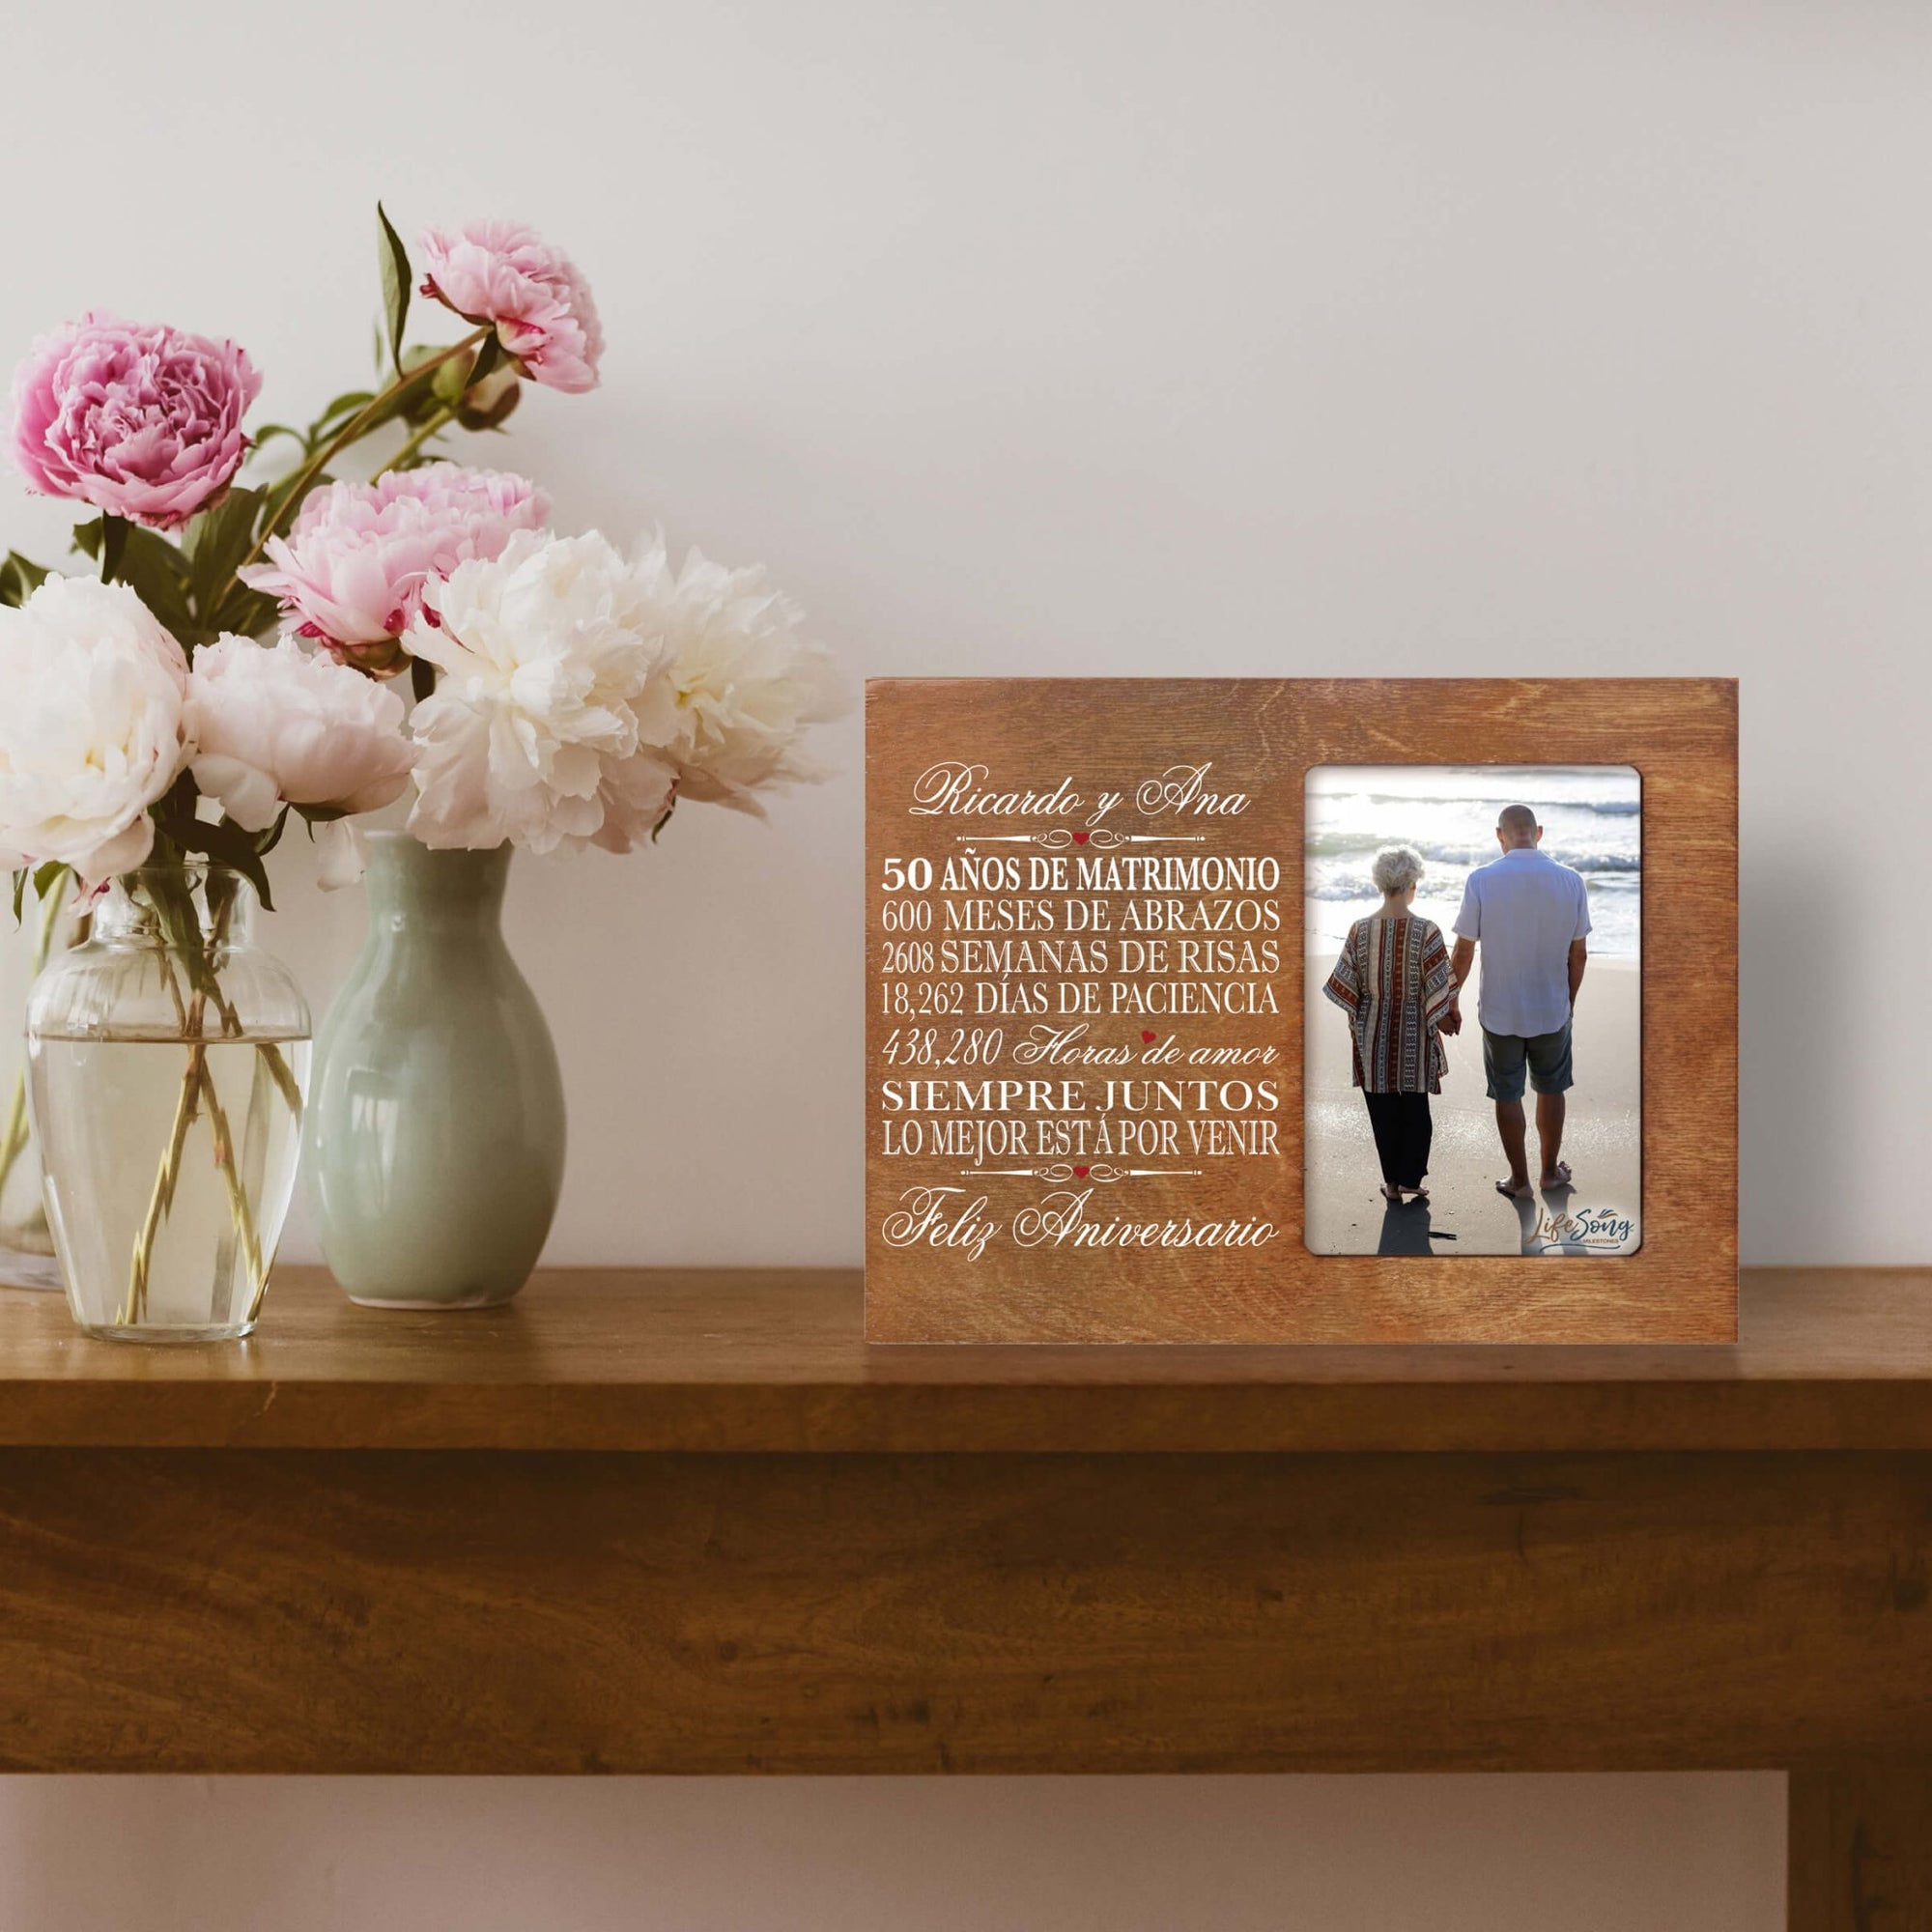 Unique 25th Wedding Anniversary Gift Ideas for Couples – Spanish-themed frame.